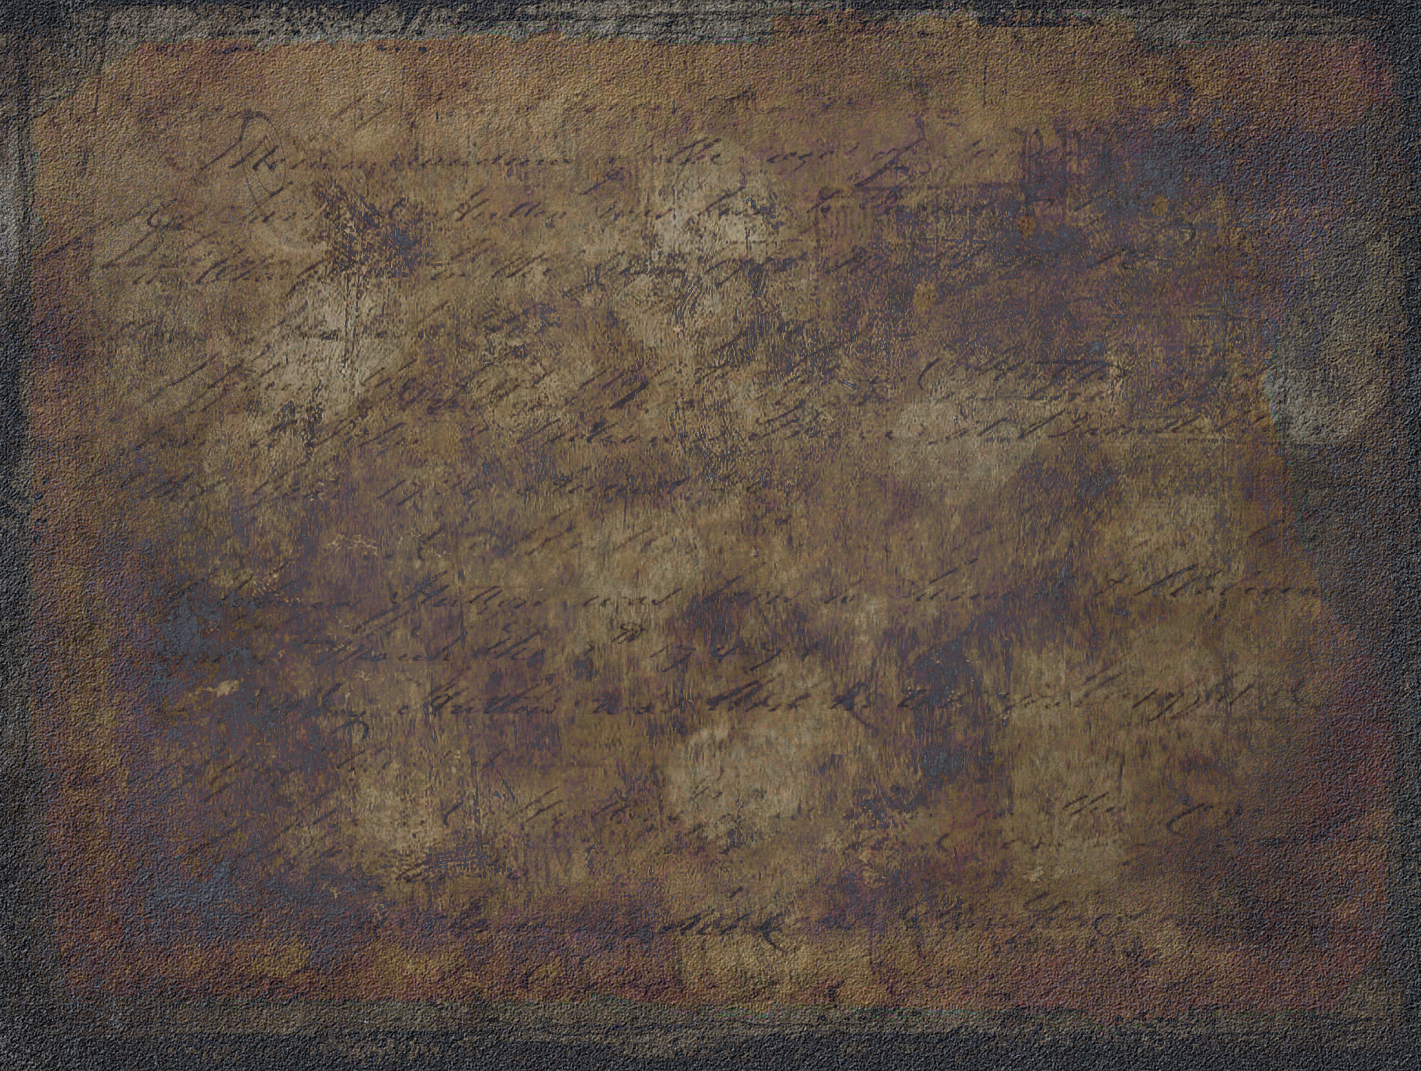 Free Old Texture